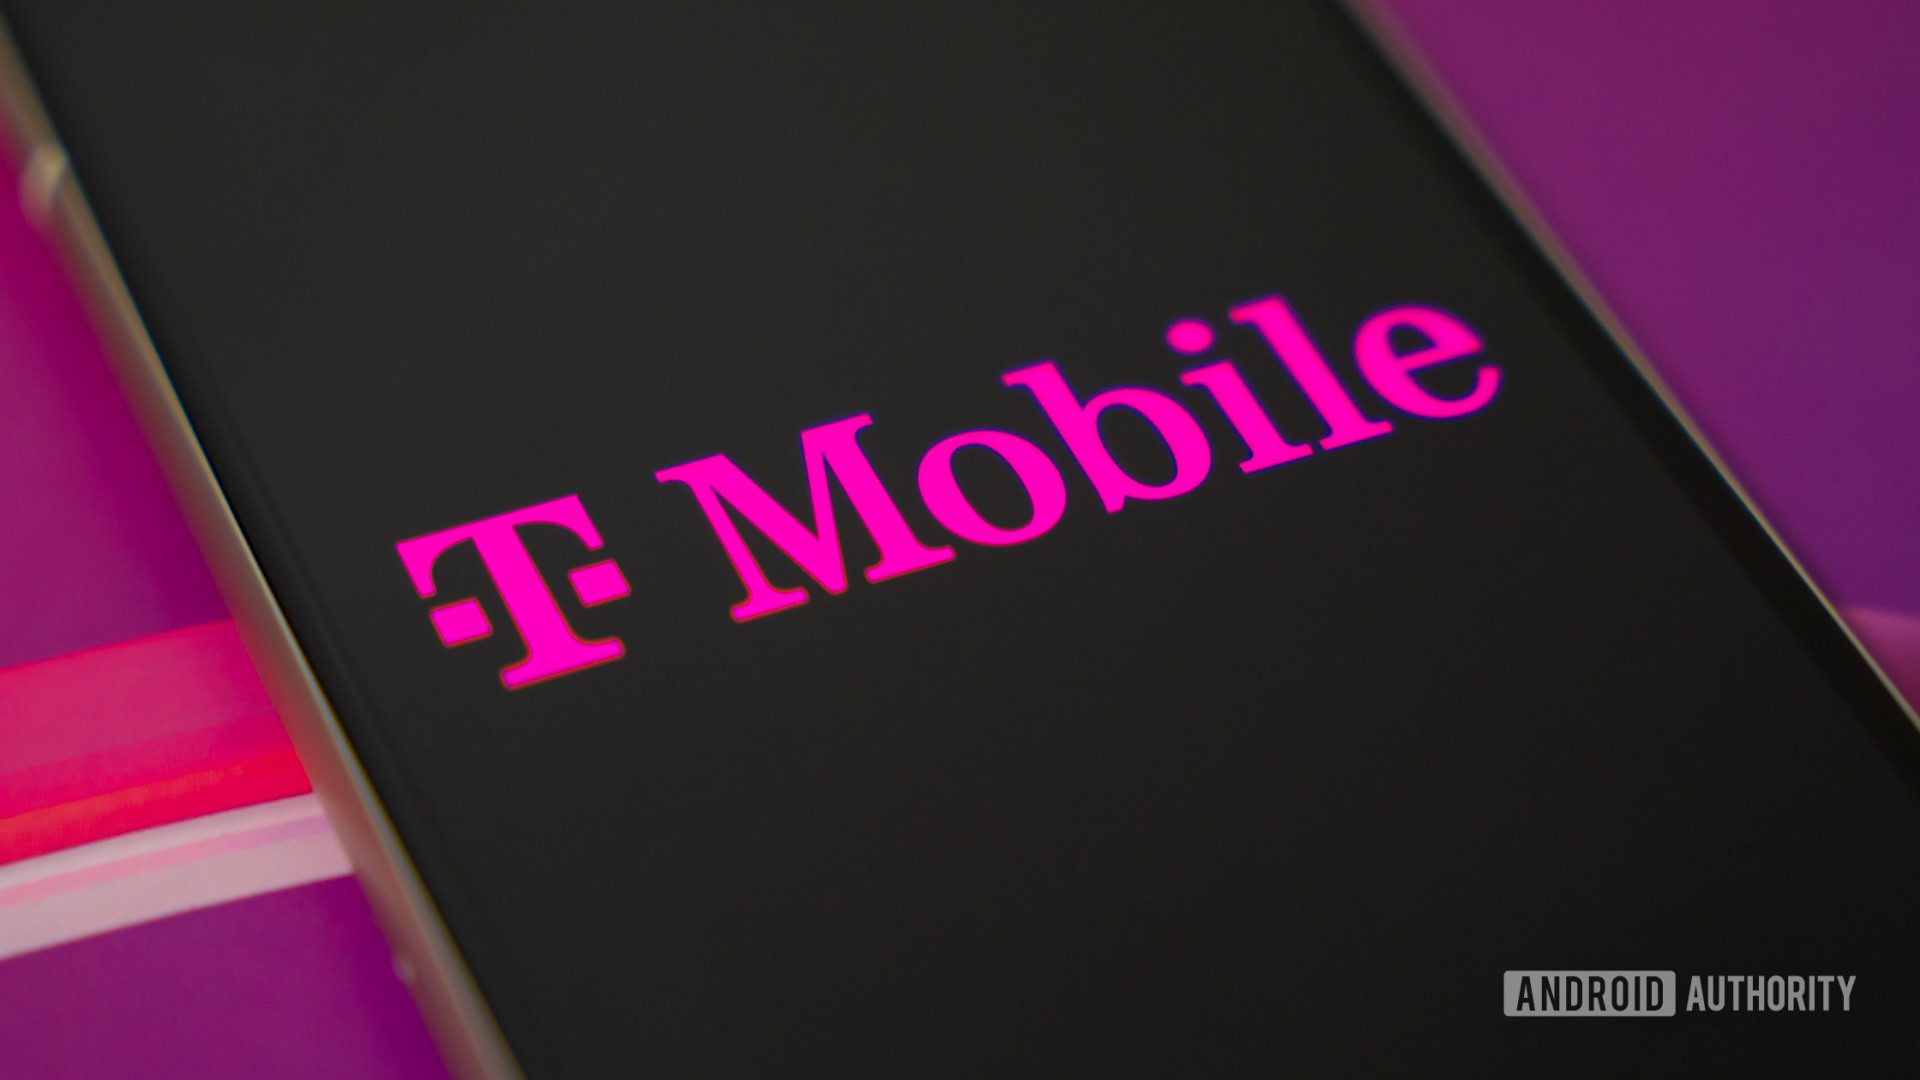 Many people are considering leaving T-Mobile after the price hike